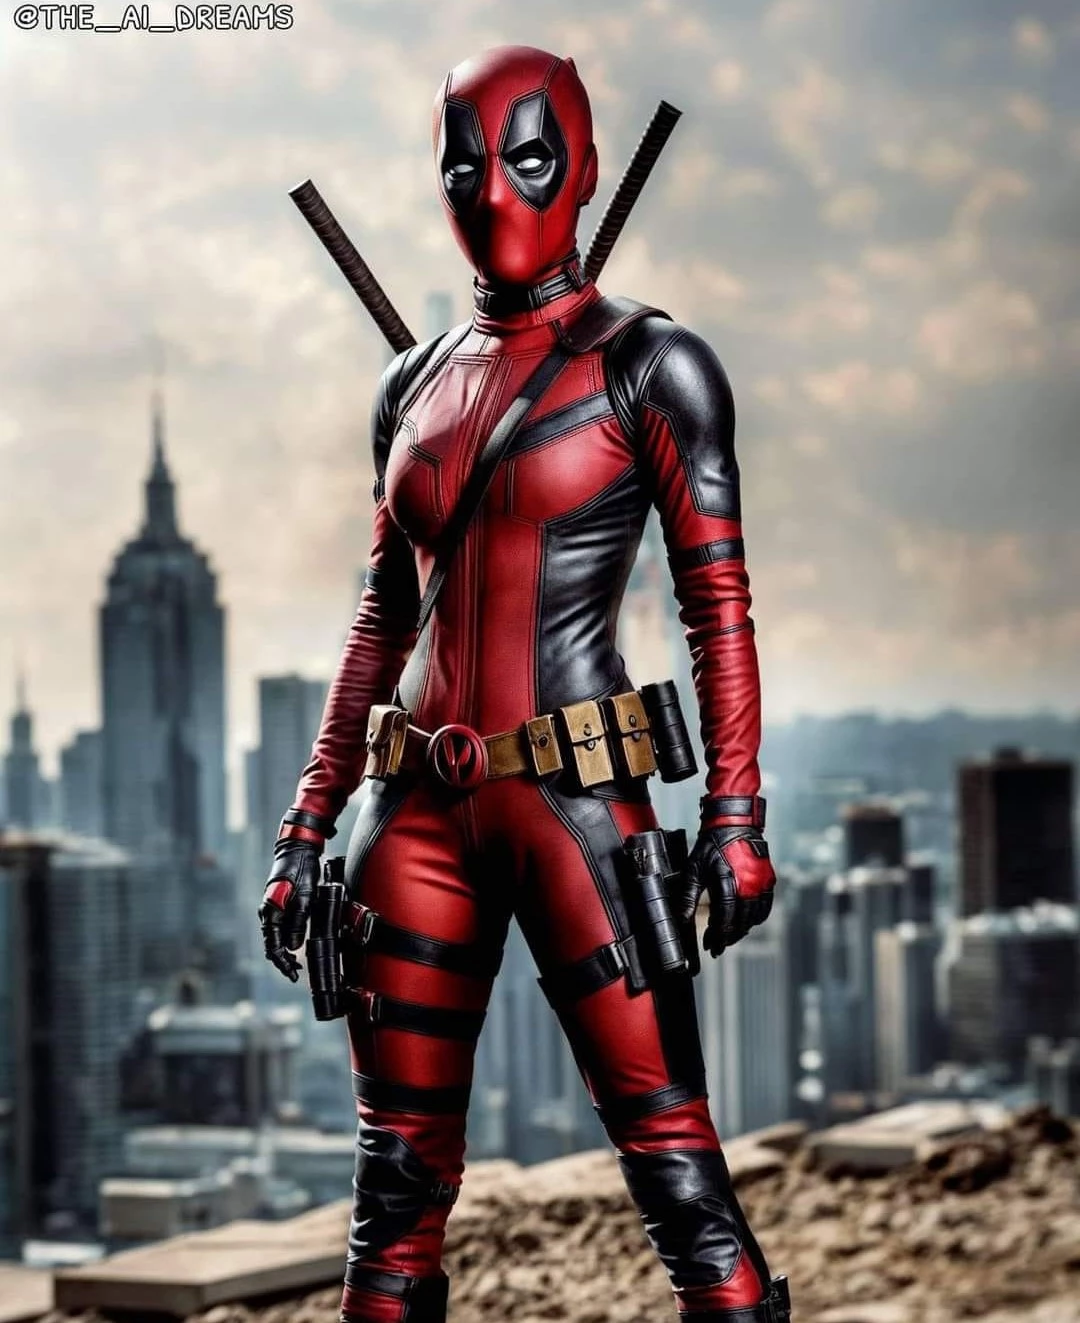 I Mean, Since We Already Have Ladypool In The Comics…